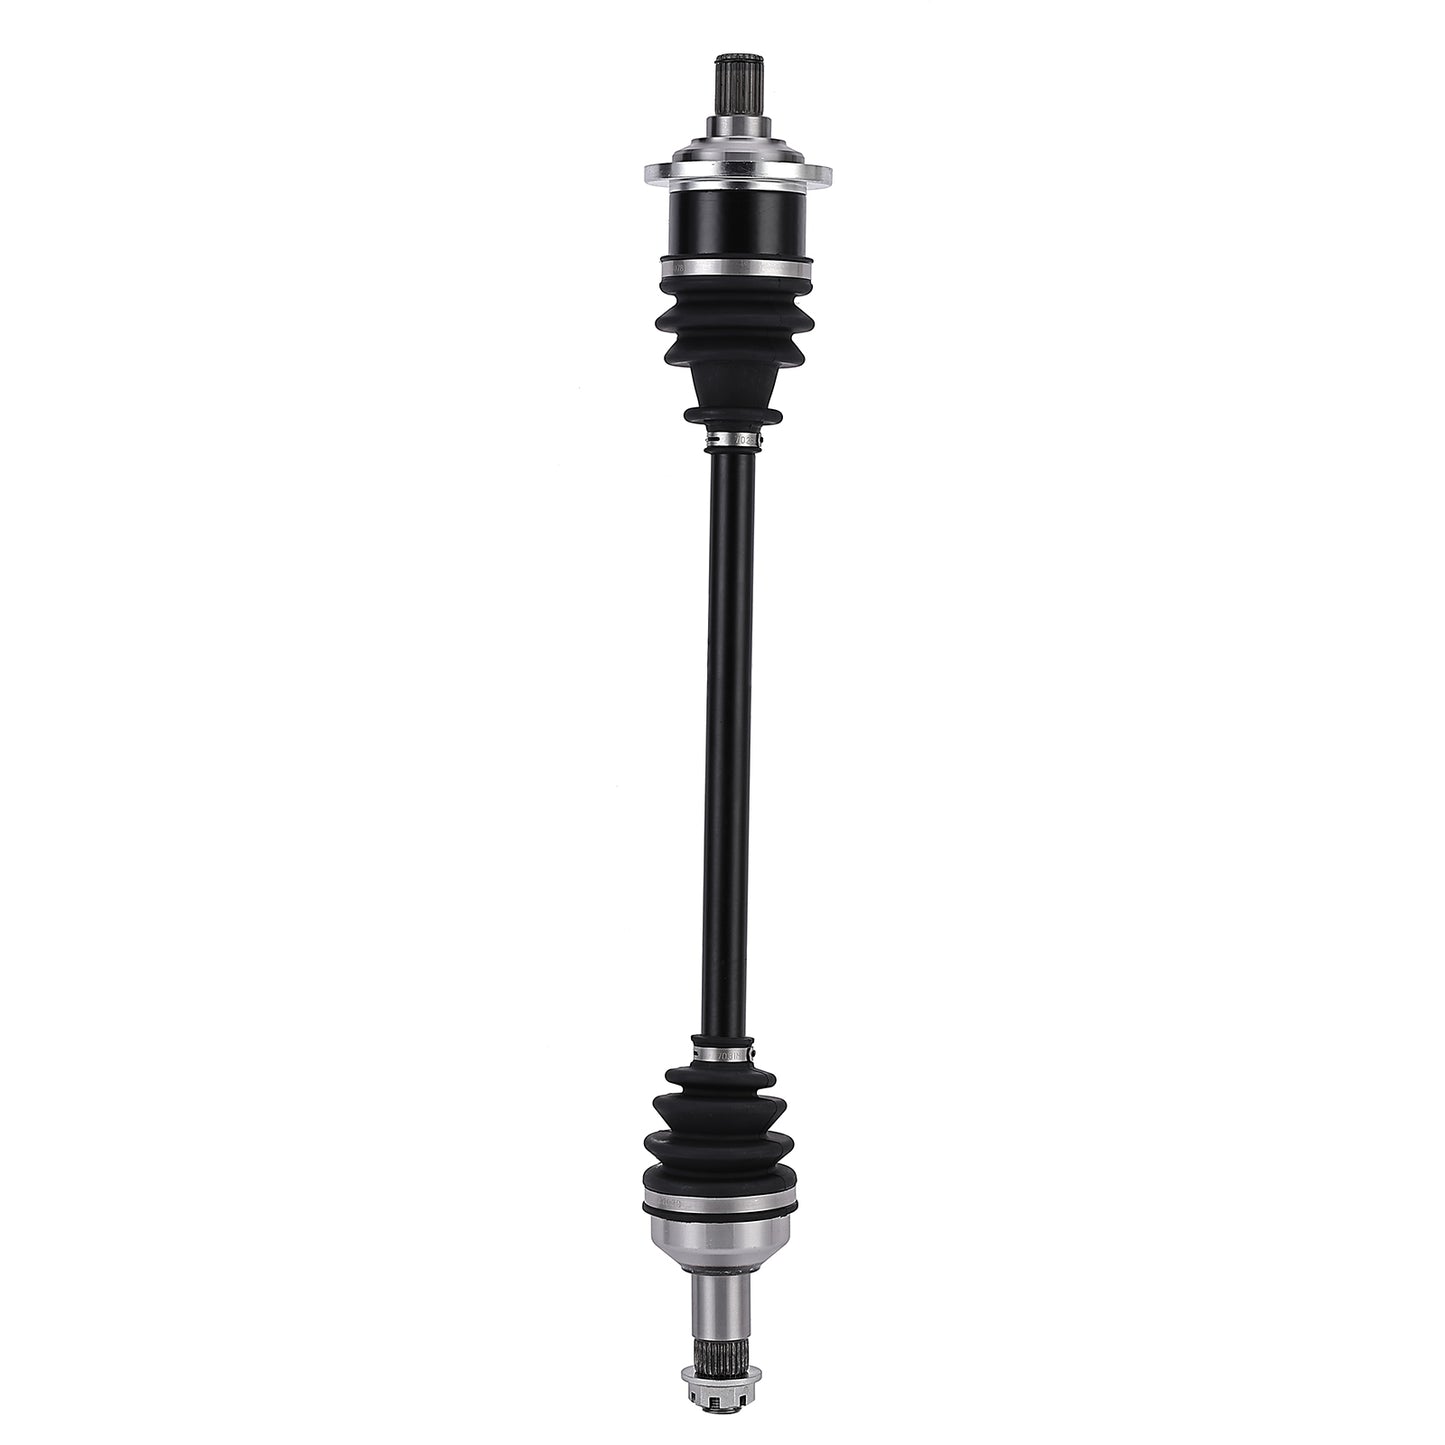 1 CAM-AC147 and 1 CAM-AC247 Front Left Drive Shaft CV Axle for ARCTIC CAT (2014) 500 Prowler LF / (2009-2015) 550 Prowler LF / (2008-2014) 700 Prowler LF & BR / (2009-2014) XTZ 1000 Prowler LF